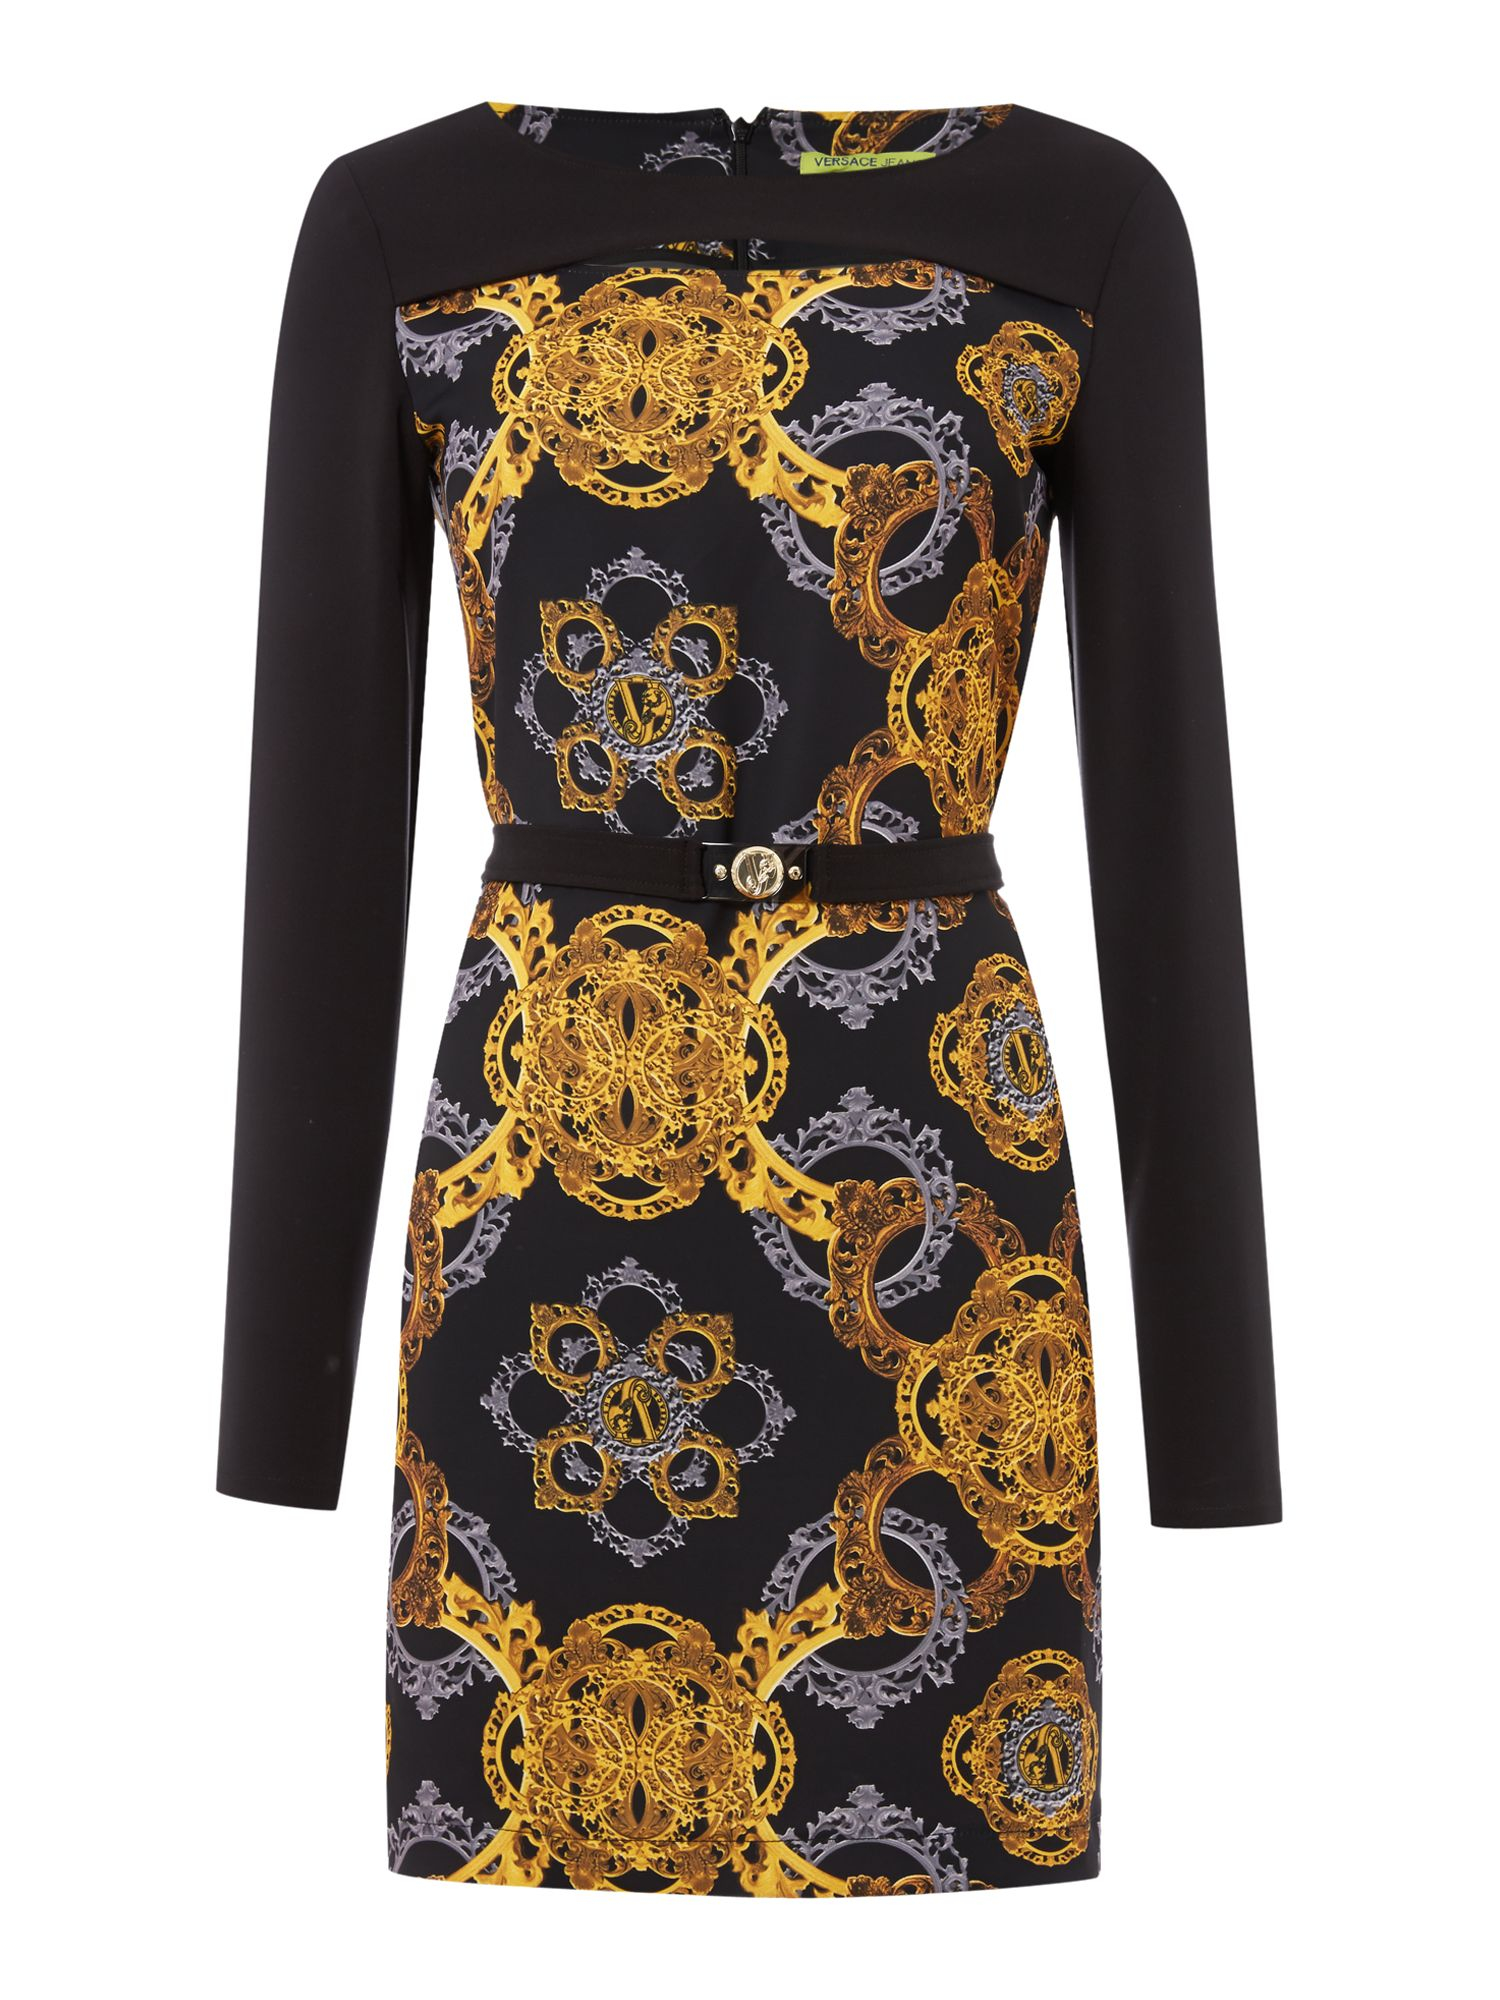 Versace jeans Long Sleeve Contrast Print Dress in Gold (Black Gold) | Lyst